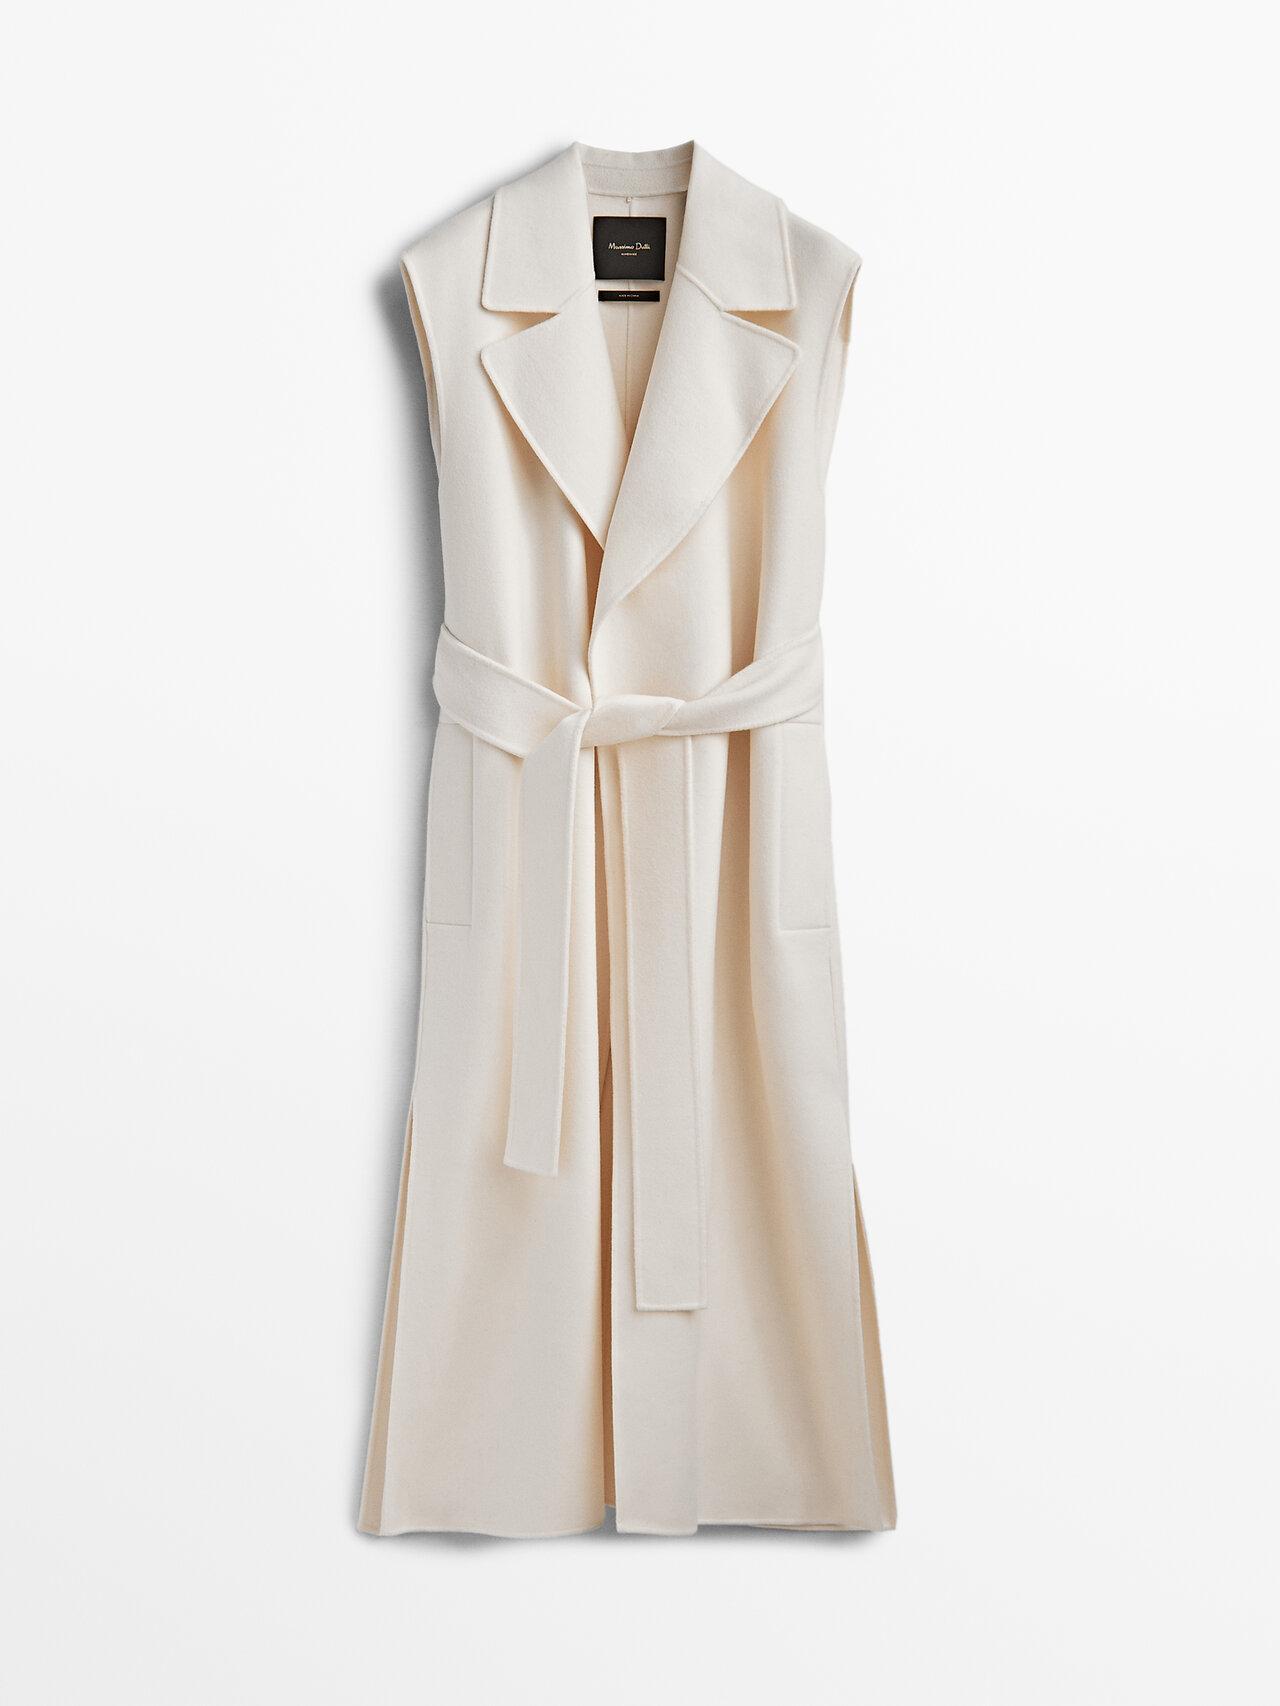 MASSIMO DUTTI Longline Wool Waistcoat With Belt in Natural | Lyst